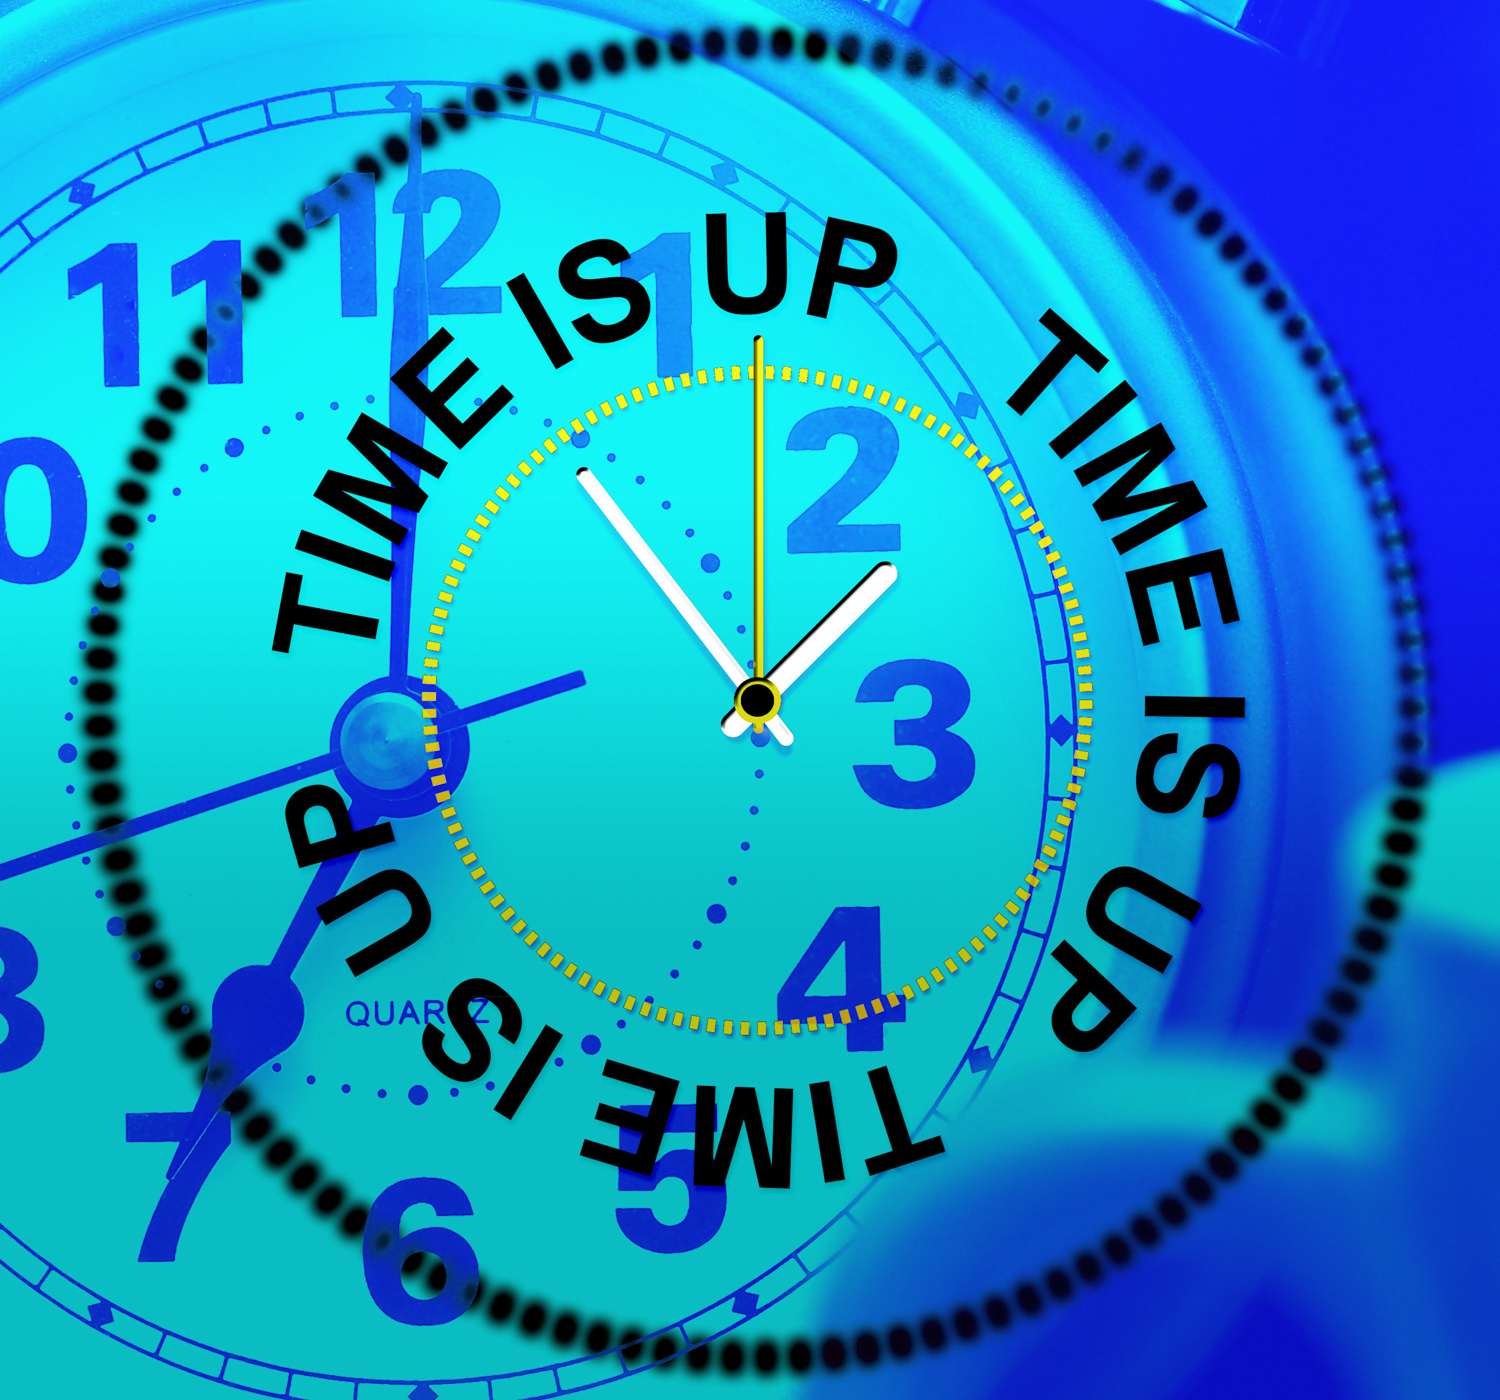 Time is up indicates behind schedule and checking photo